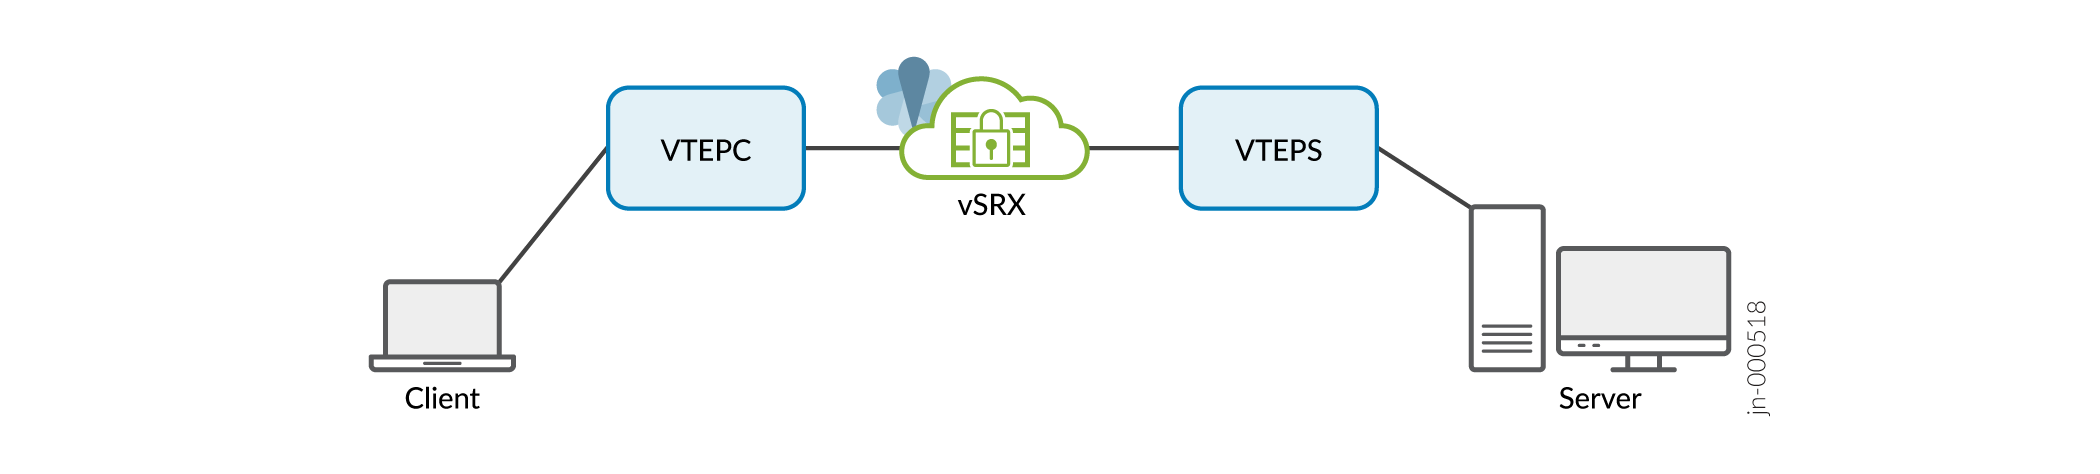 Simplified Topology of vSRX 3.0 as Transit Router